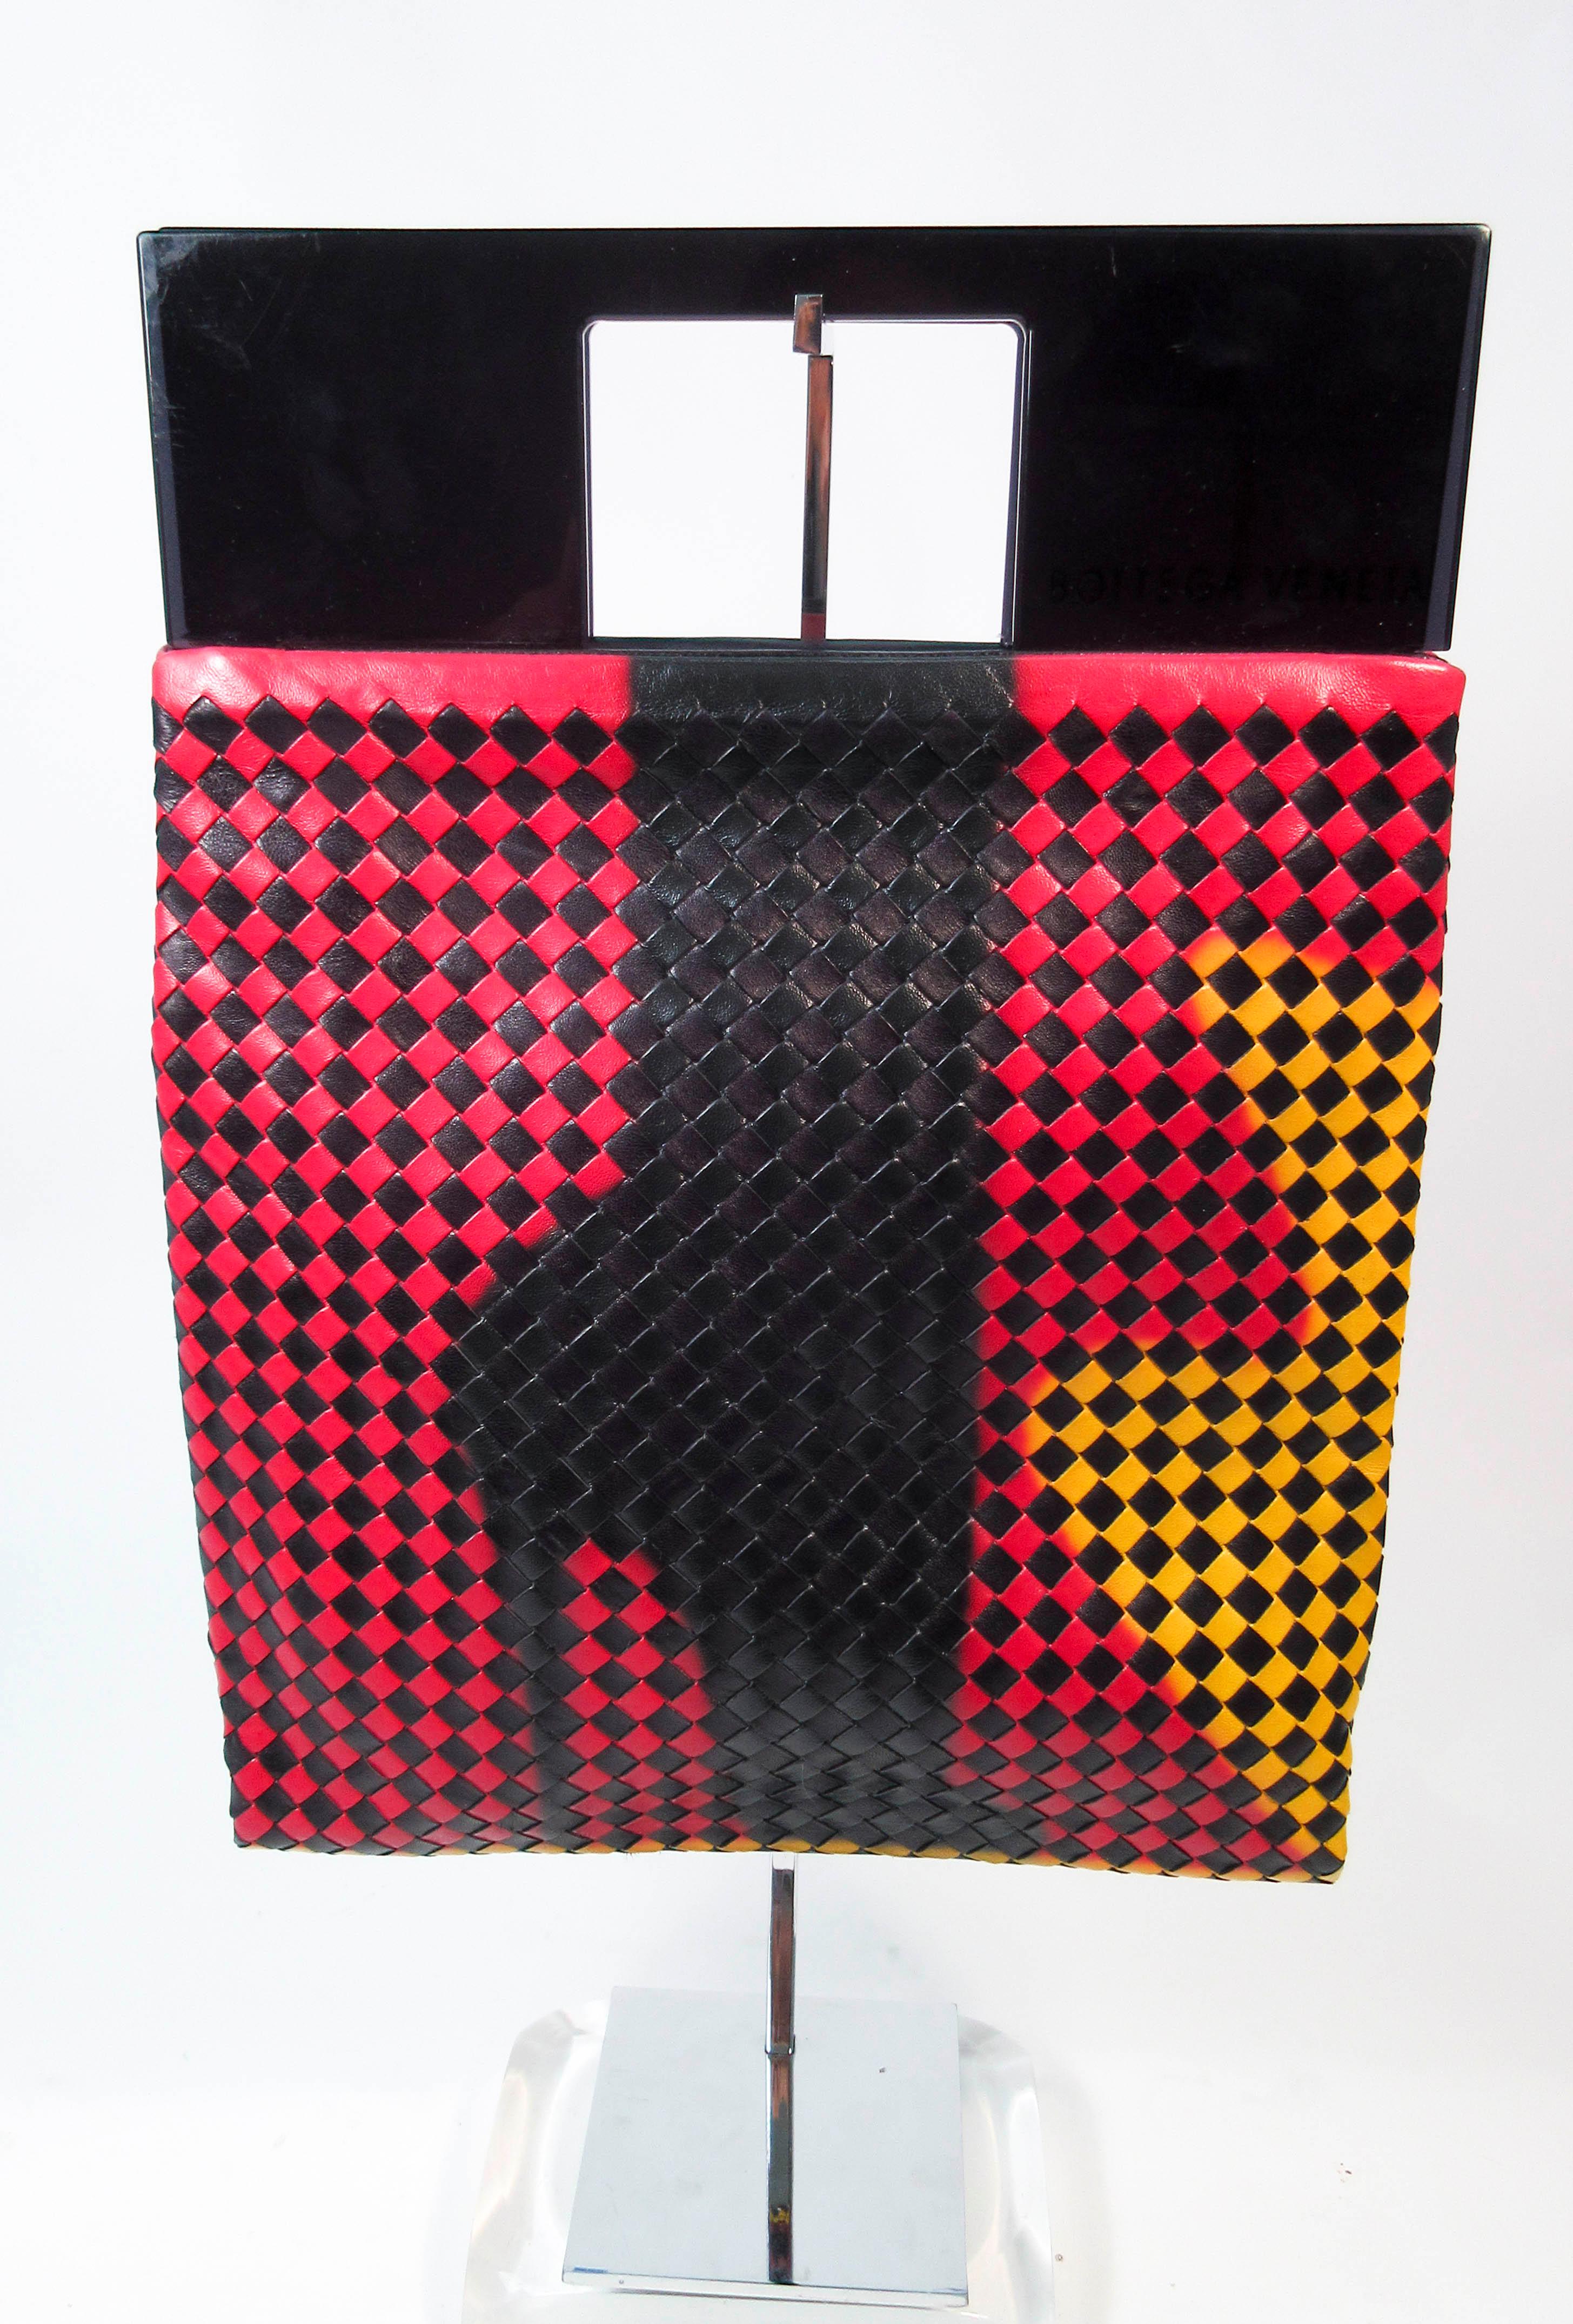 This Bottega Veneta purse is composed of a beautiful black, yellow, and red woven leather with a high heel design. Features a shopper shape with a plastic upper frame and suede lining. There is an interior zipper pocket. In excellent almost new